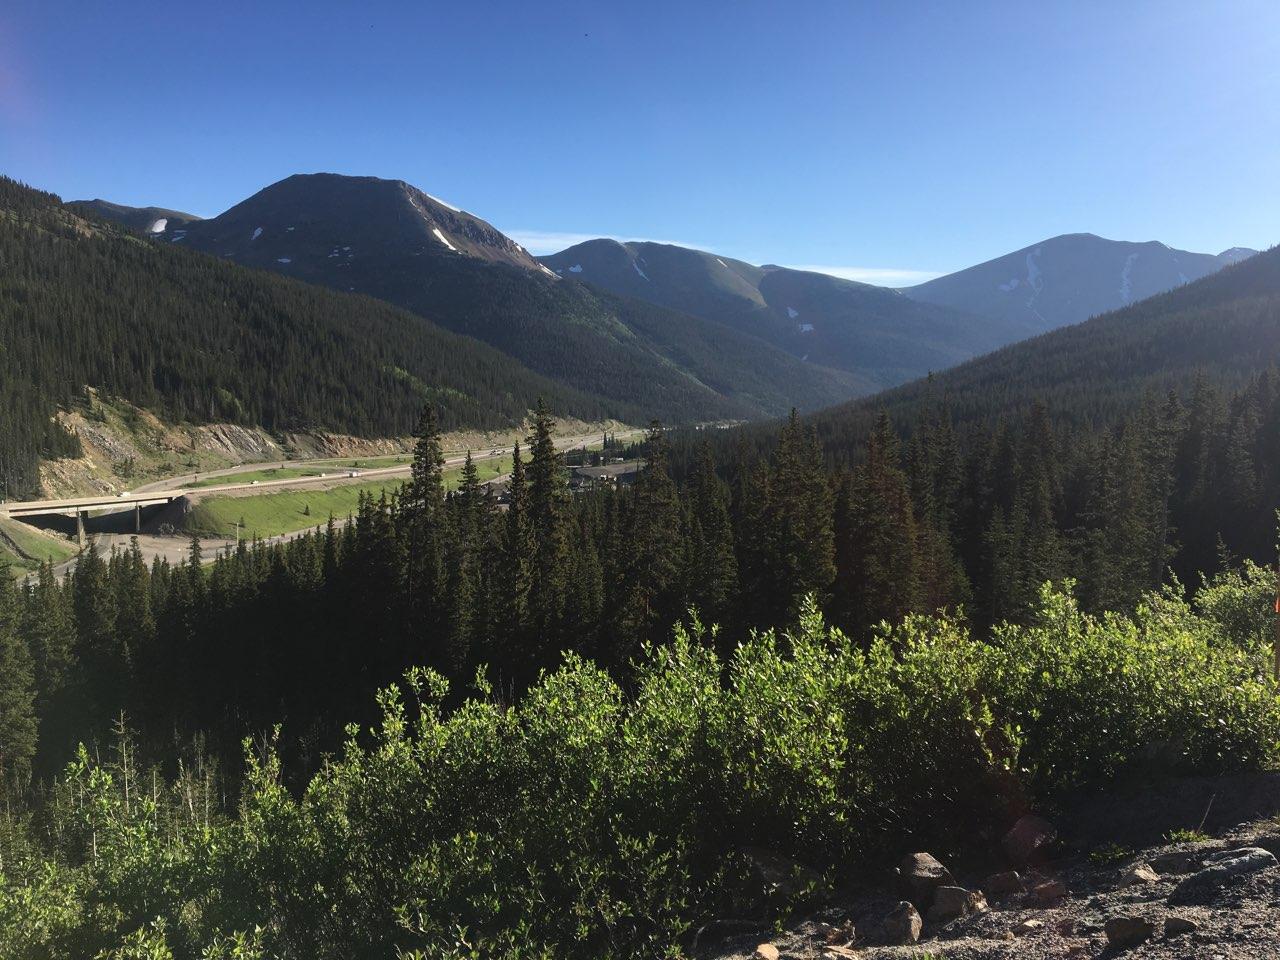 Mountains and trees in Colorado as photographed by cyclist.